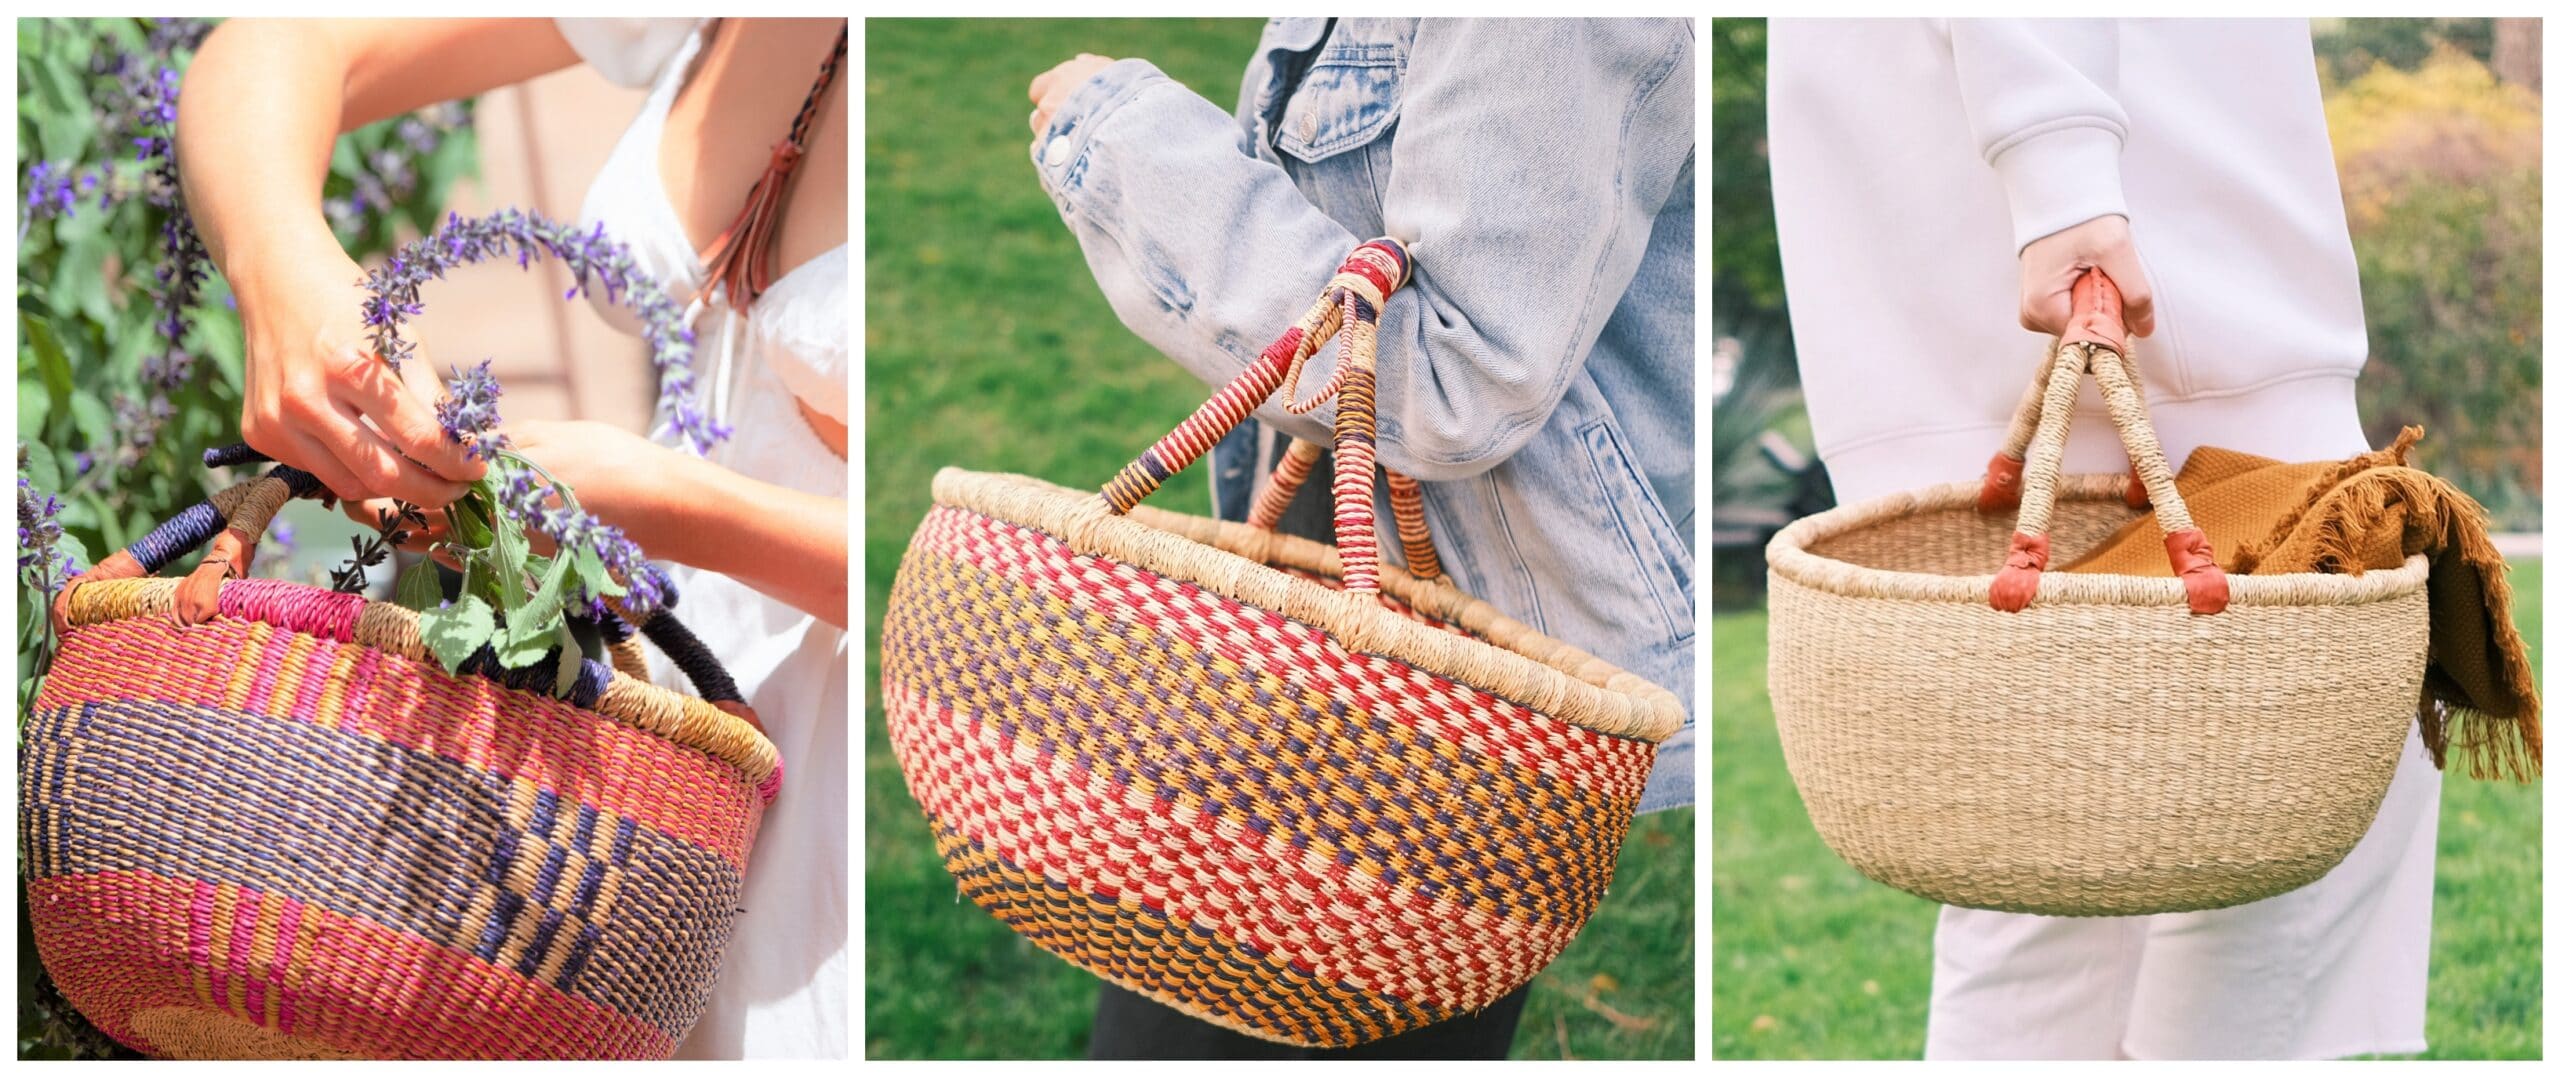 Bolga round baskets, handmade in Ghana, West Africa. Perfect for shopping and picnics.